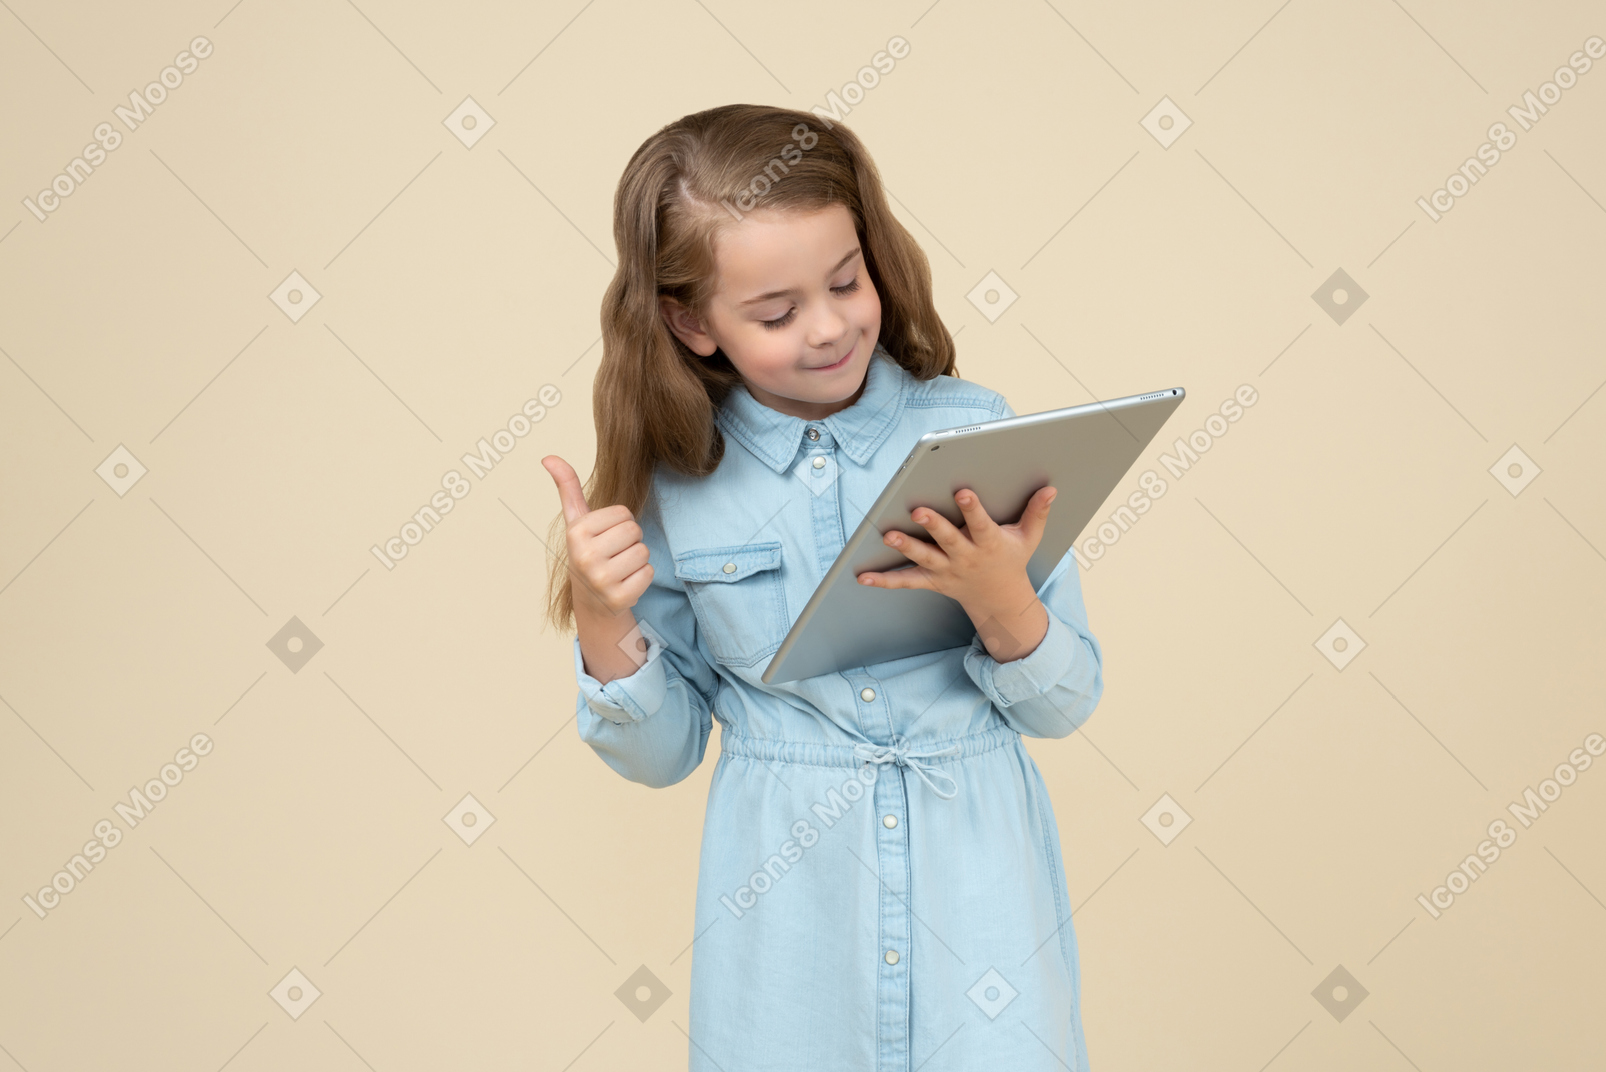 Cute little girl holding a tablet and showing thumbs up